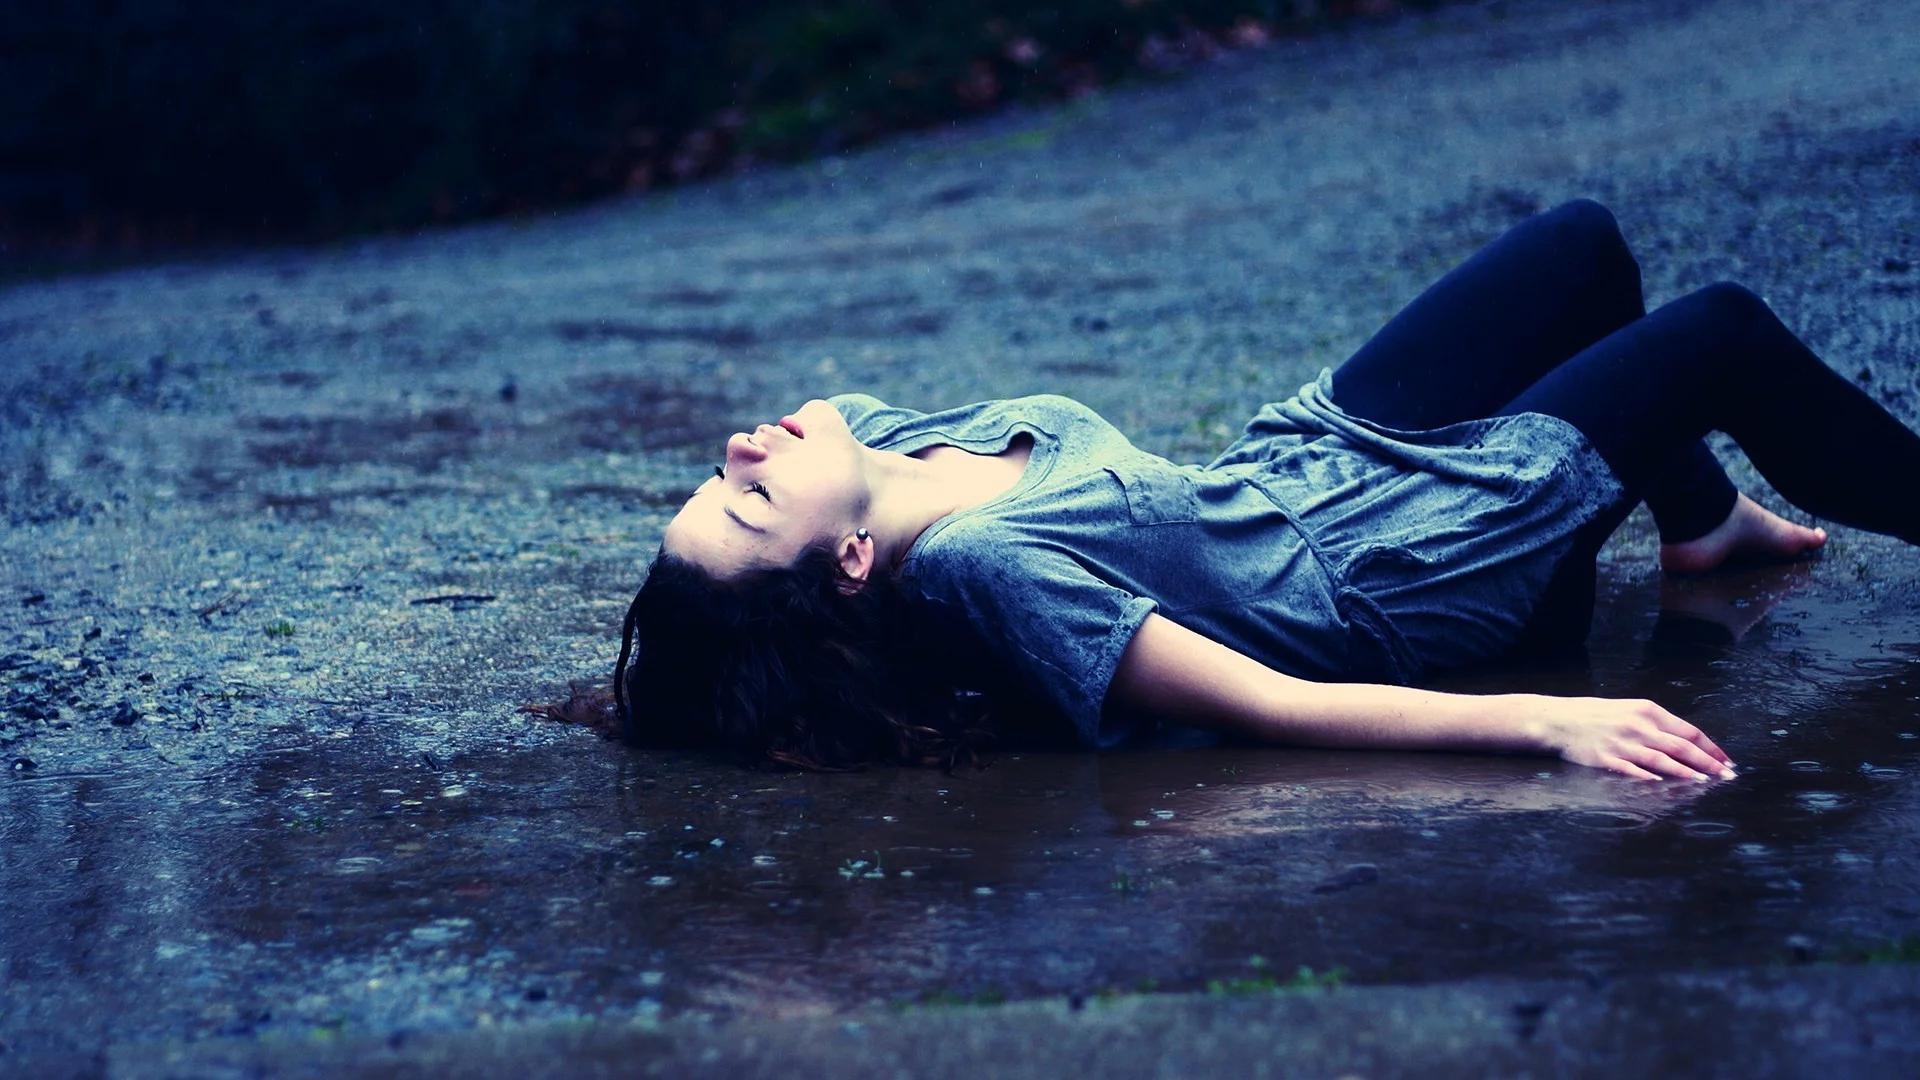 Girls in Rain Wallpapers HD Pictures